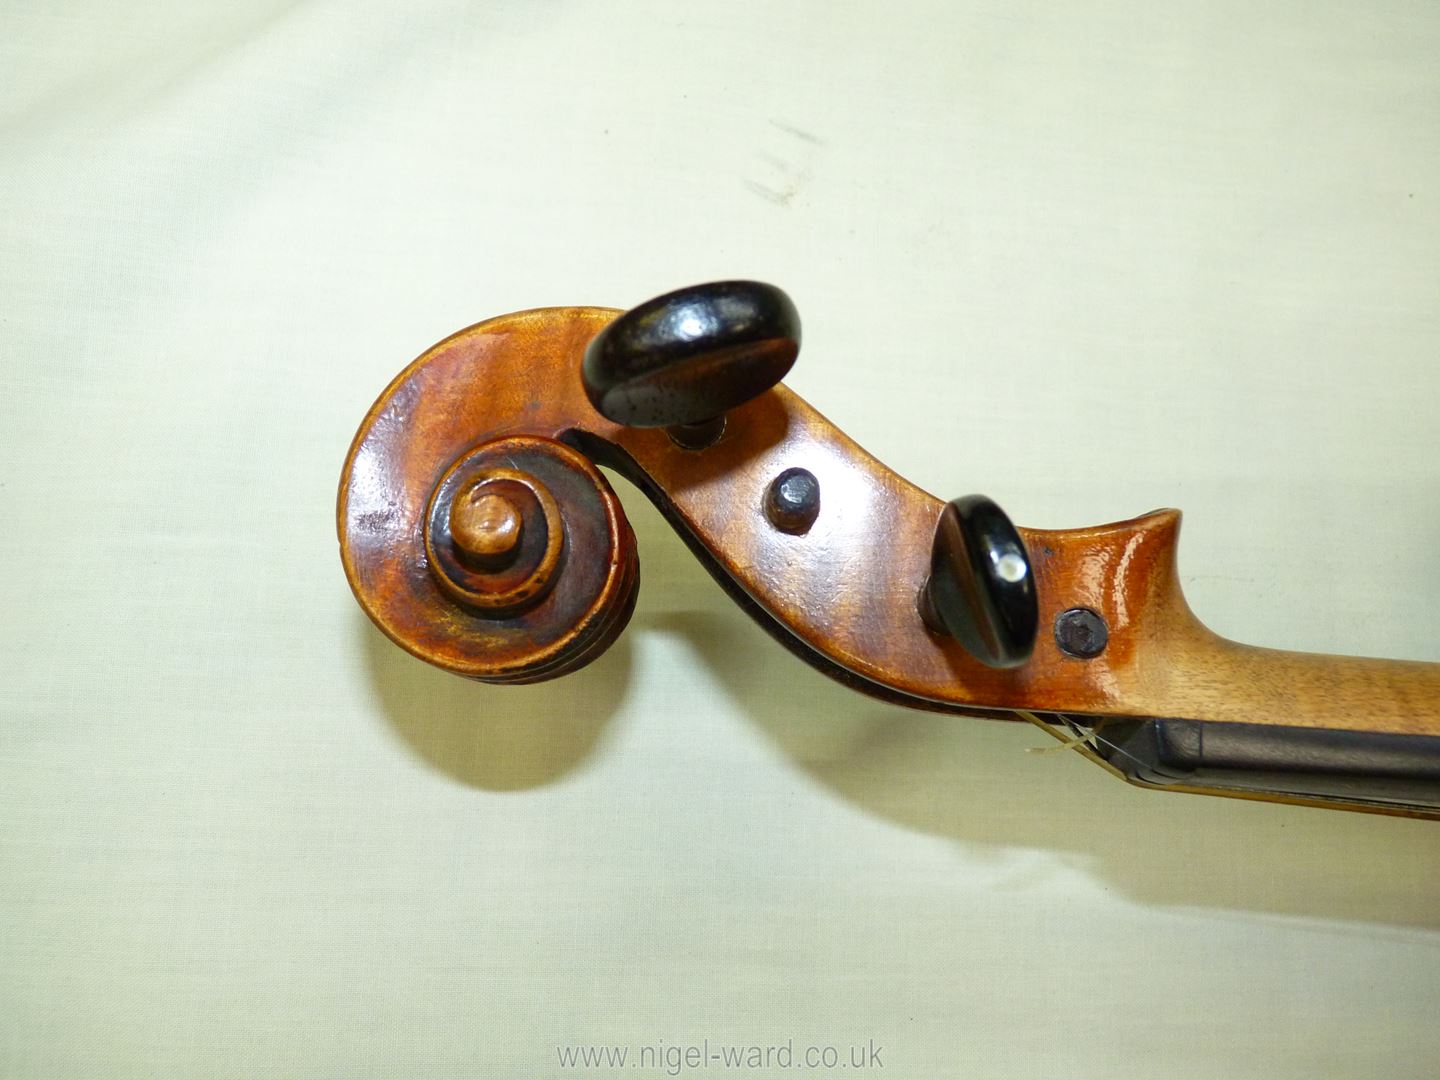 An antique violin having a well-carved scroll and nicely figured body including the back, - Image 8 of 49